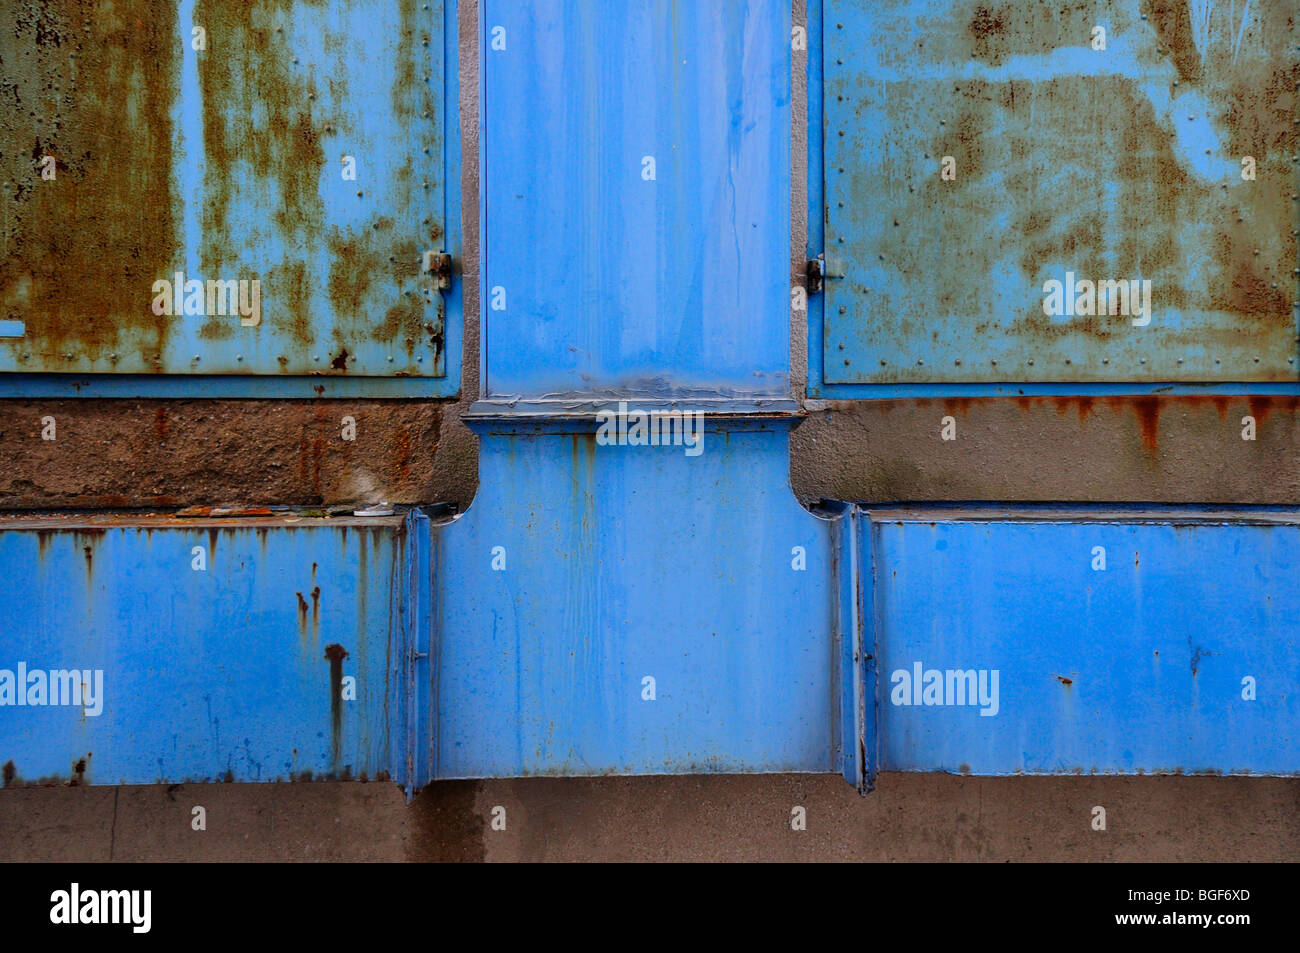 Detail of blue rusty ventilation ducts and metal doors Stock Photo